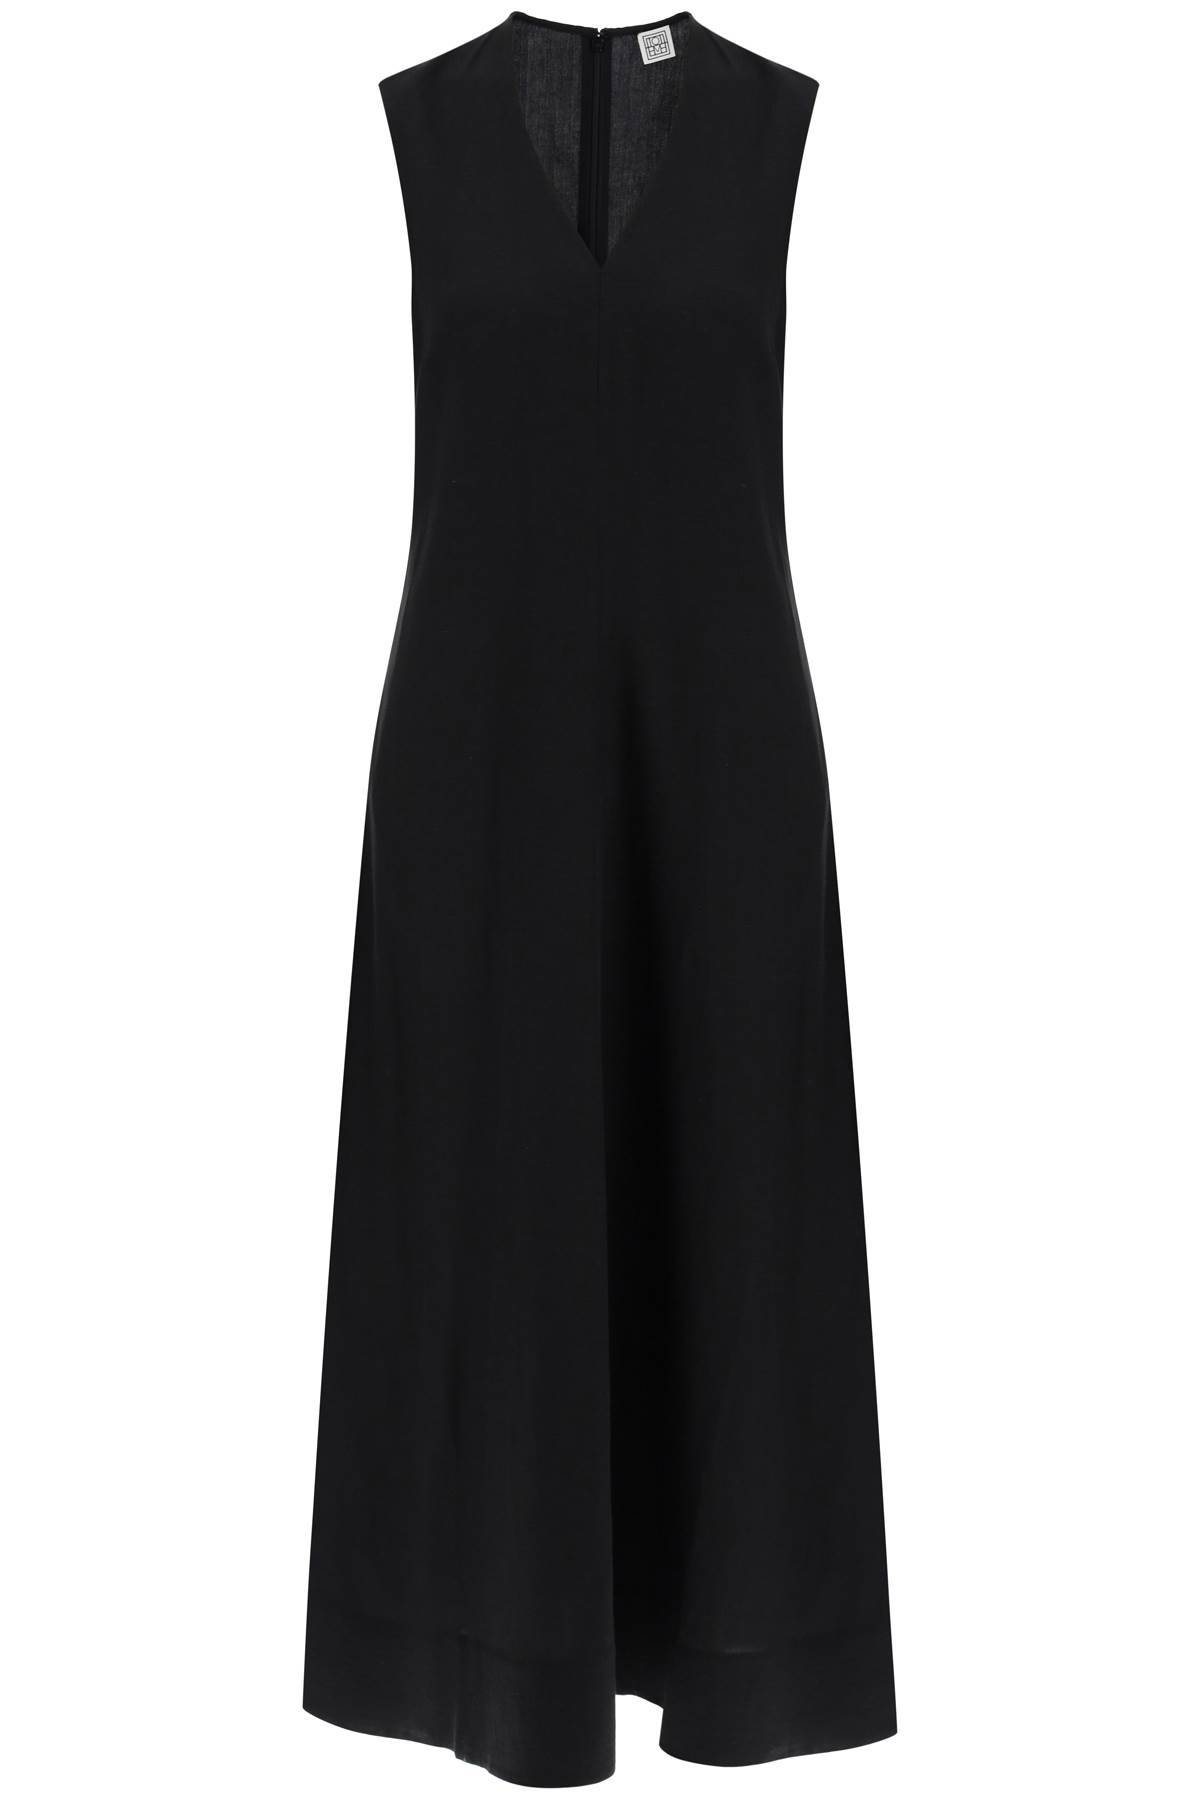 Toteme TOTEME maxi flared dress with v-neckline